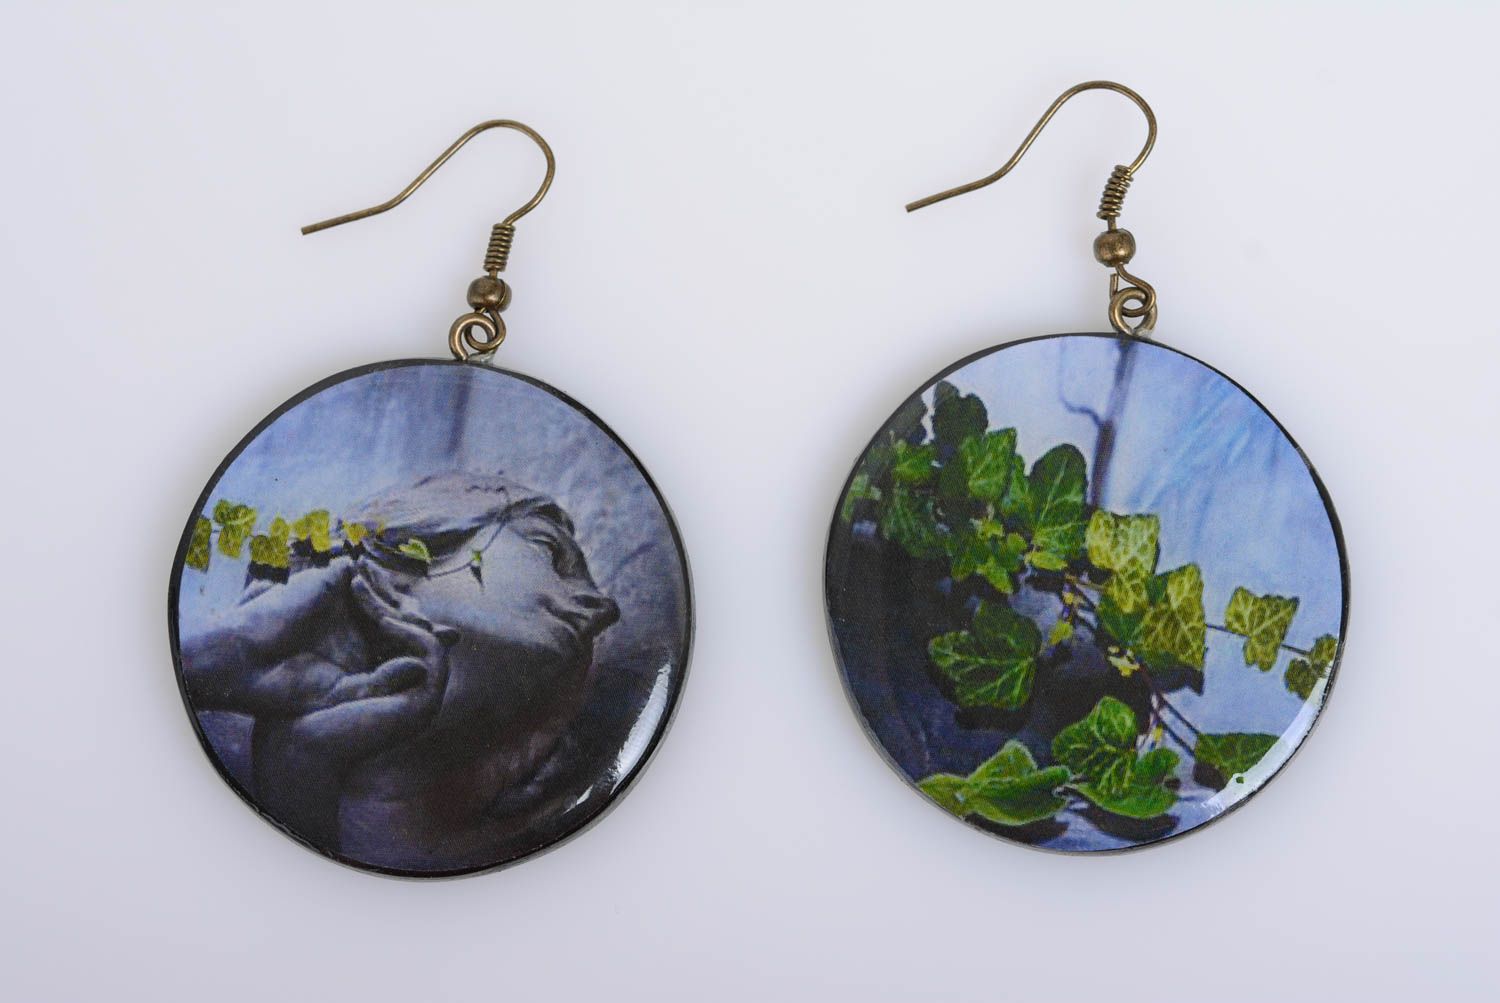 Polymer clay handmade decoupage earrings with sculpture image summer accessory photo 3